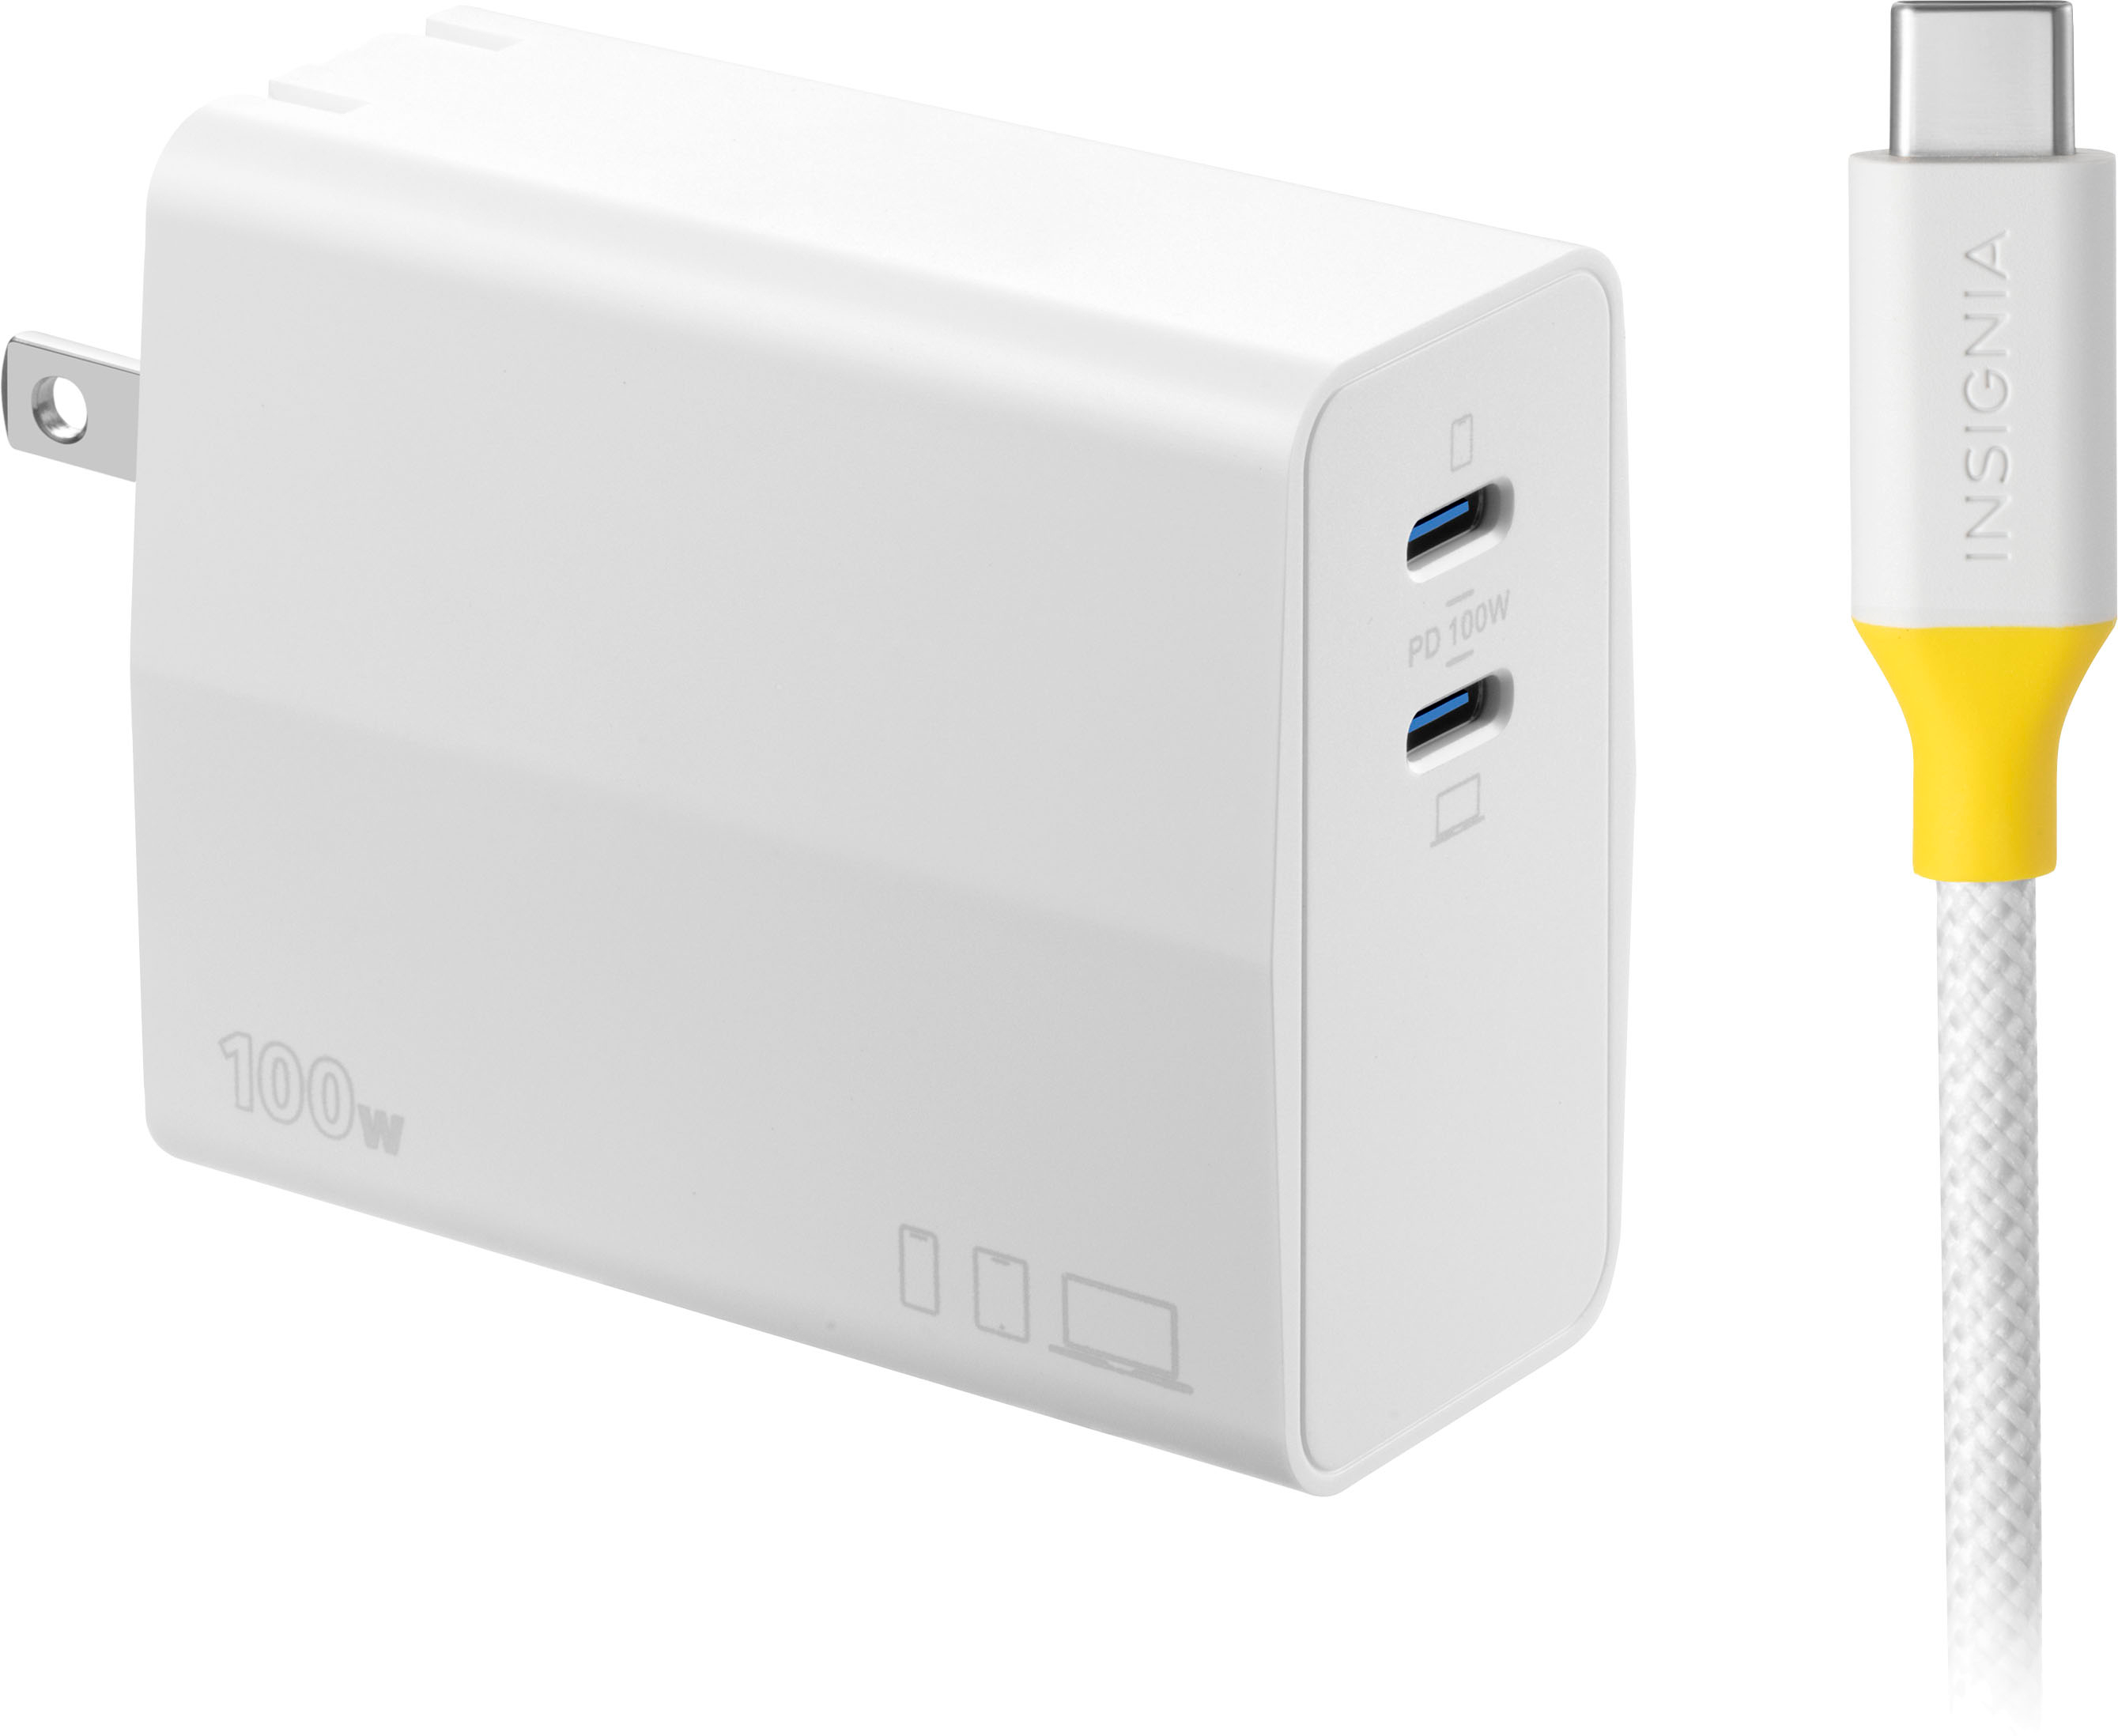 CHARGEUR COMPACT 100W USB-C PD GAN